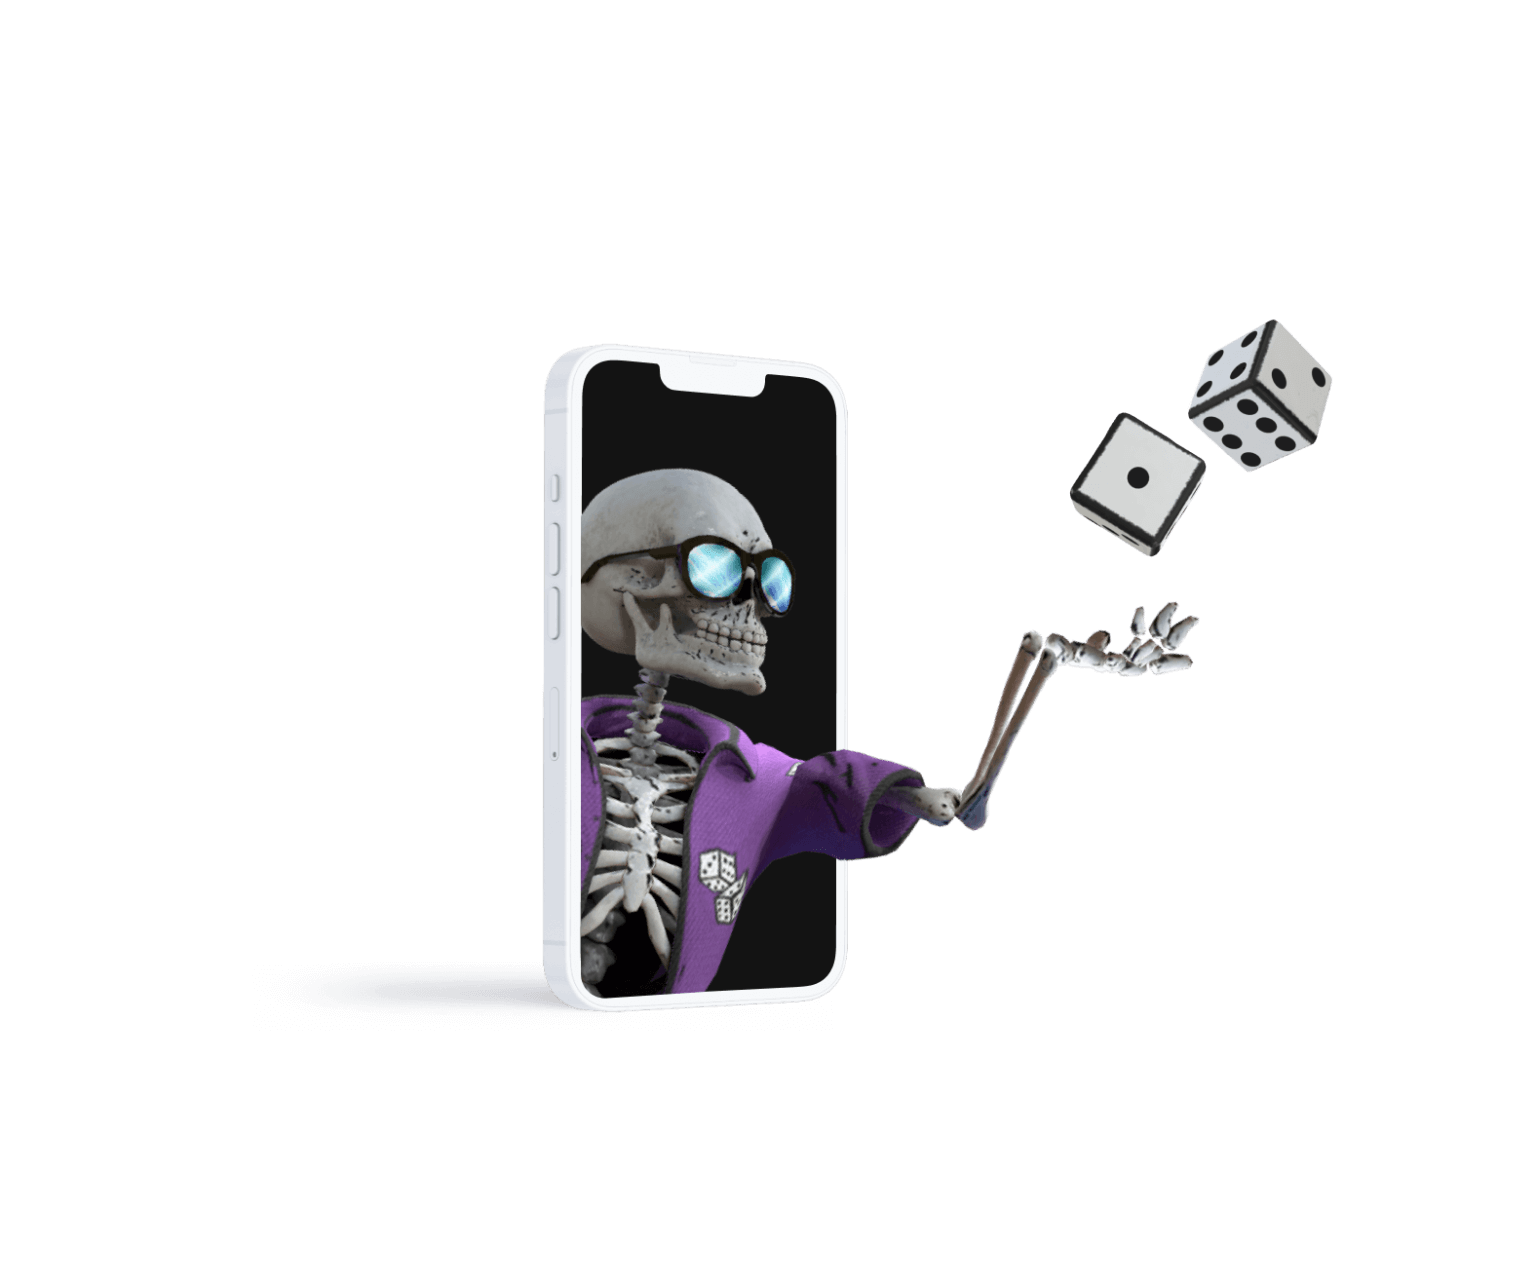 Web AR skeleton wearing a purple bowling shirt emerging from a phone, throwing dice into the air